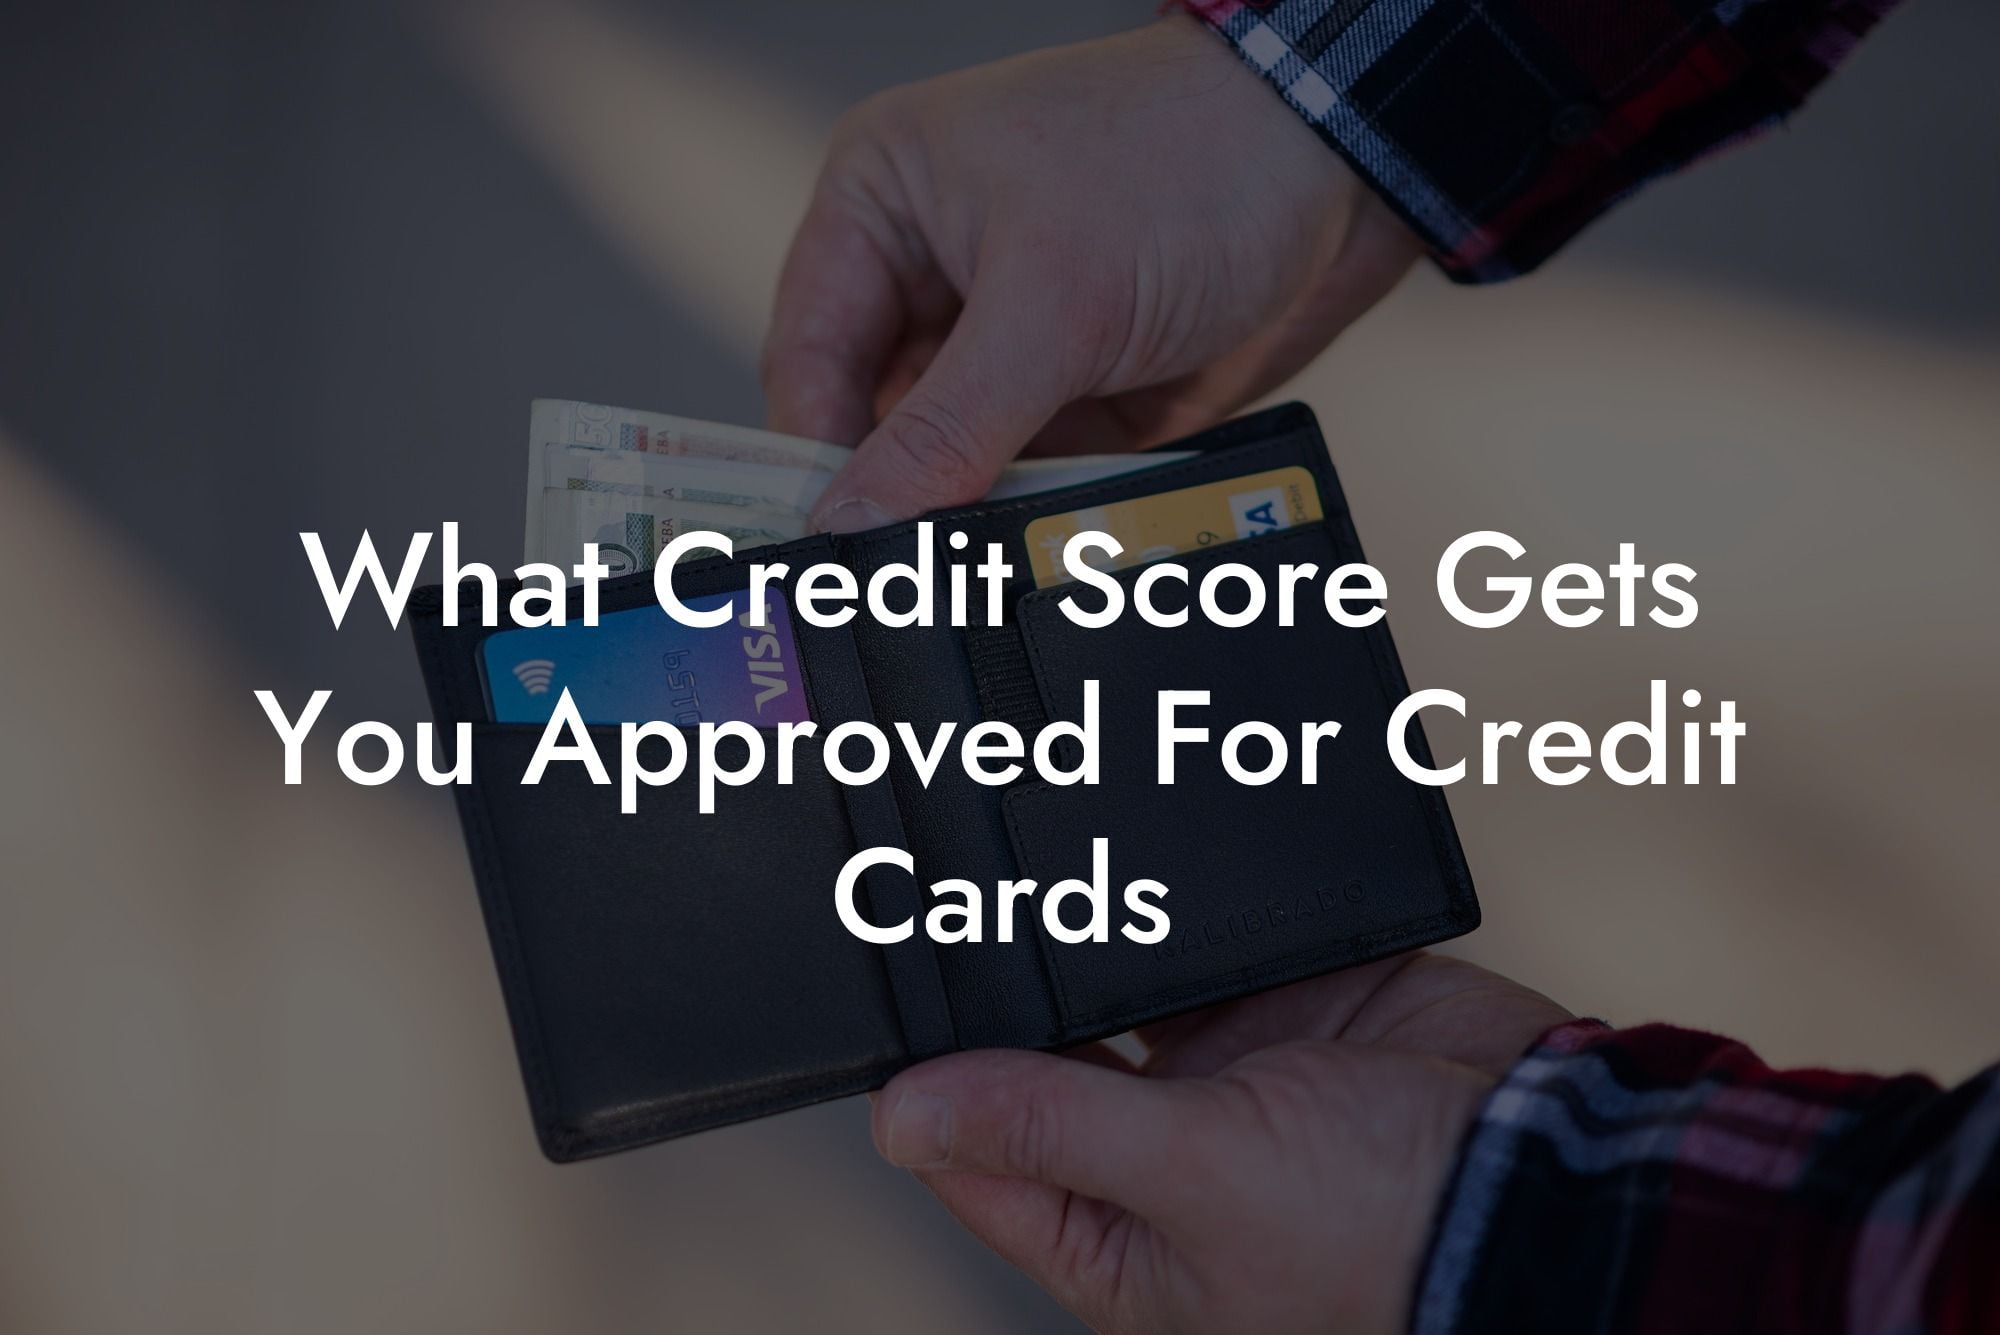 What Credit Score Gets You Approved For Credit Cards